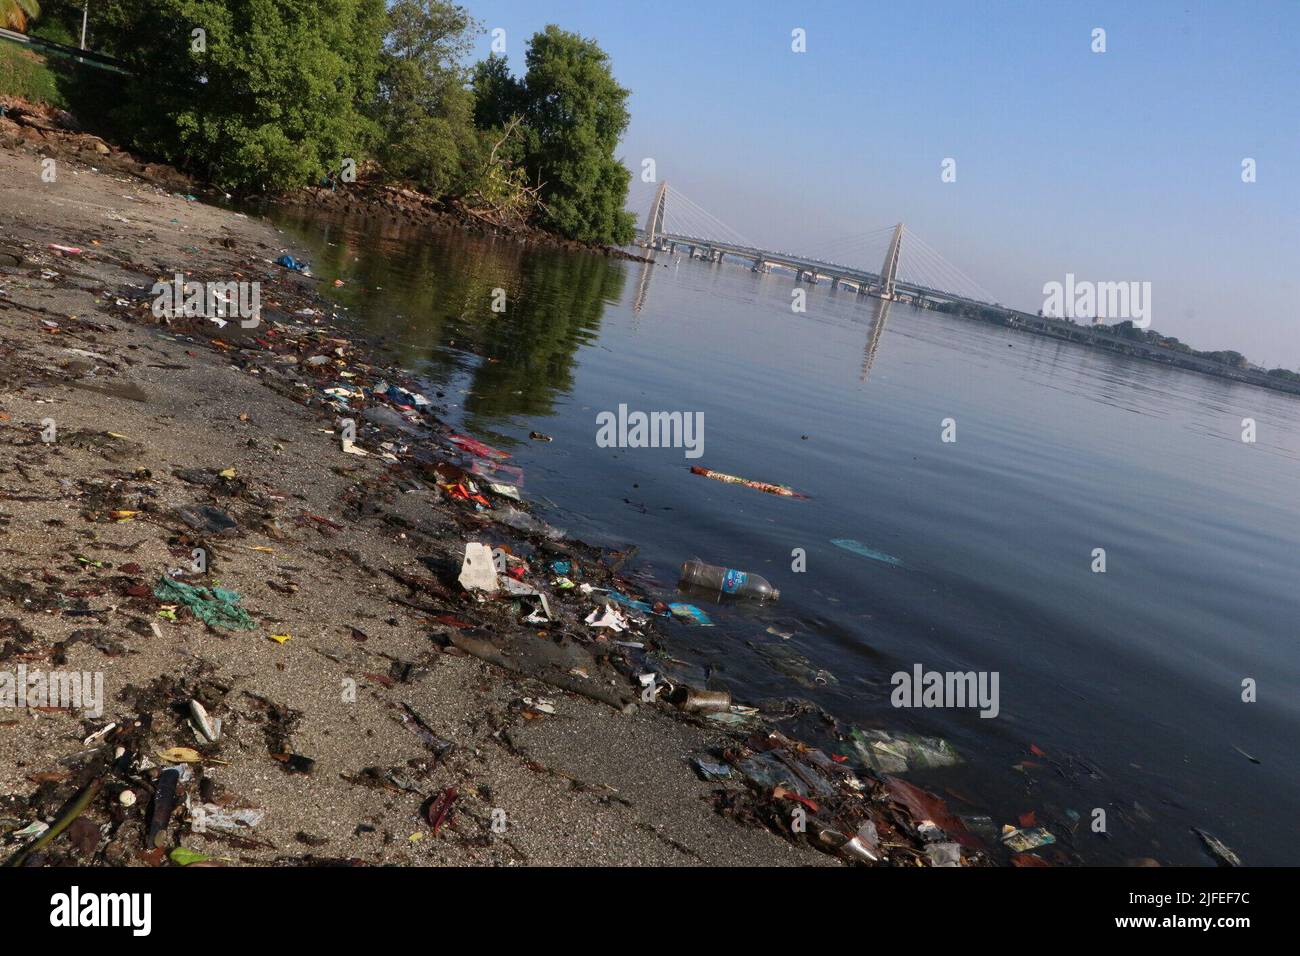 https://c8.alamy.com/comp/2JFEF7C/rio-de-janeiro-rio-de-janeiro-brasil-2nd-july-2022-int-pollution-at-guanabara-bay-in-rio-de-janeiro-july-2-2022-rio-de-janeiro-brazil-images-of-pollution-in-guanabara-bay-a-container-of-leftover-styrofoam-packaging-and-plastic-bags-are-seen-polluting-the-surroundings-of-guanabara-bay-on-ilha-do-fundao-next-to-ufrj-the-banks-are-suffering-the-most-from-pollution-credit-image-jose-lucenathenews2-via-zuma-press-wire-2JFEF7C.jpg